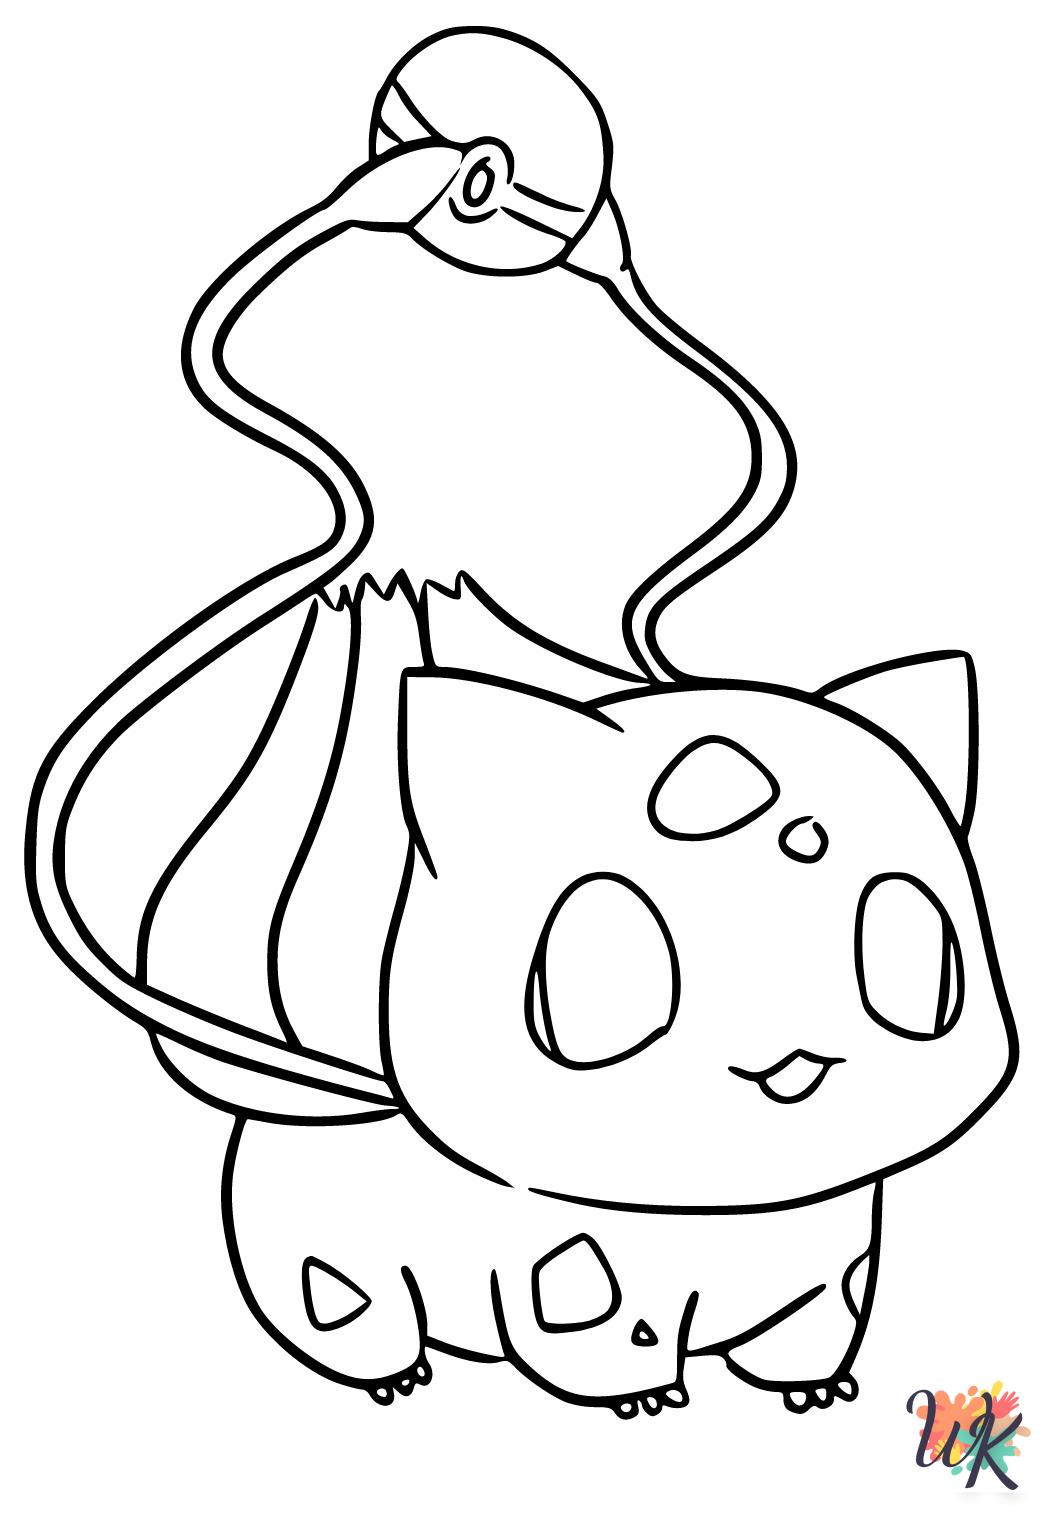 Bulbasaur coloring pages for preschoolers